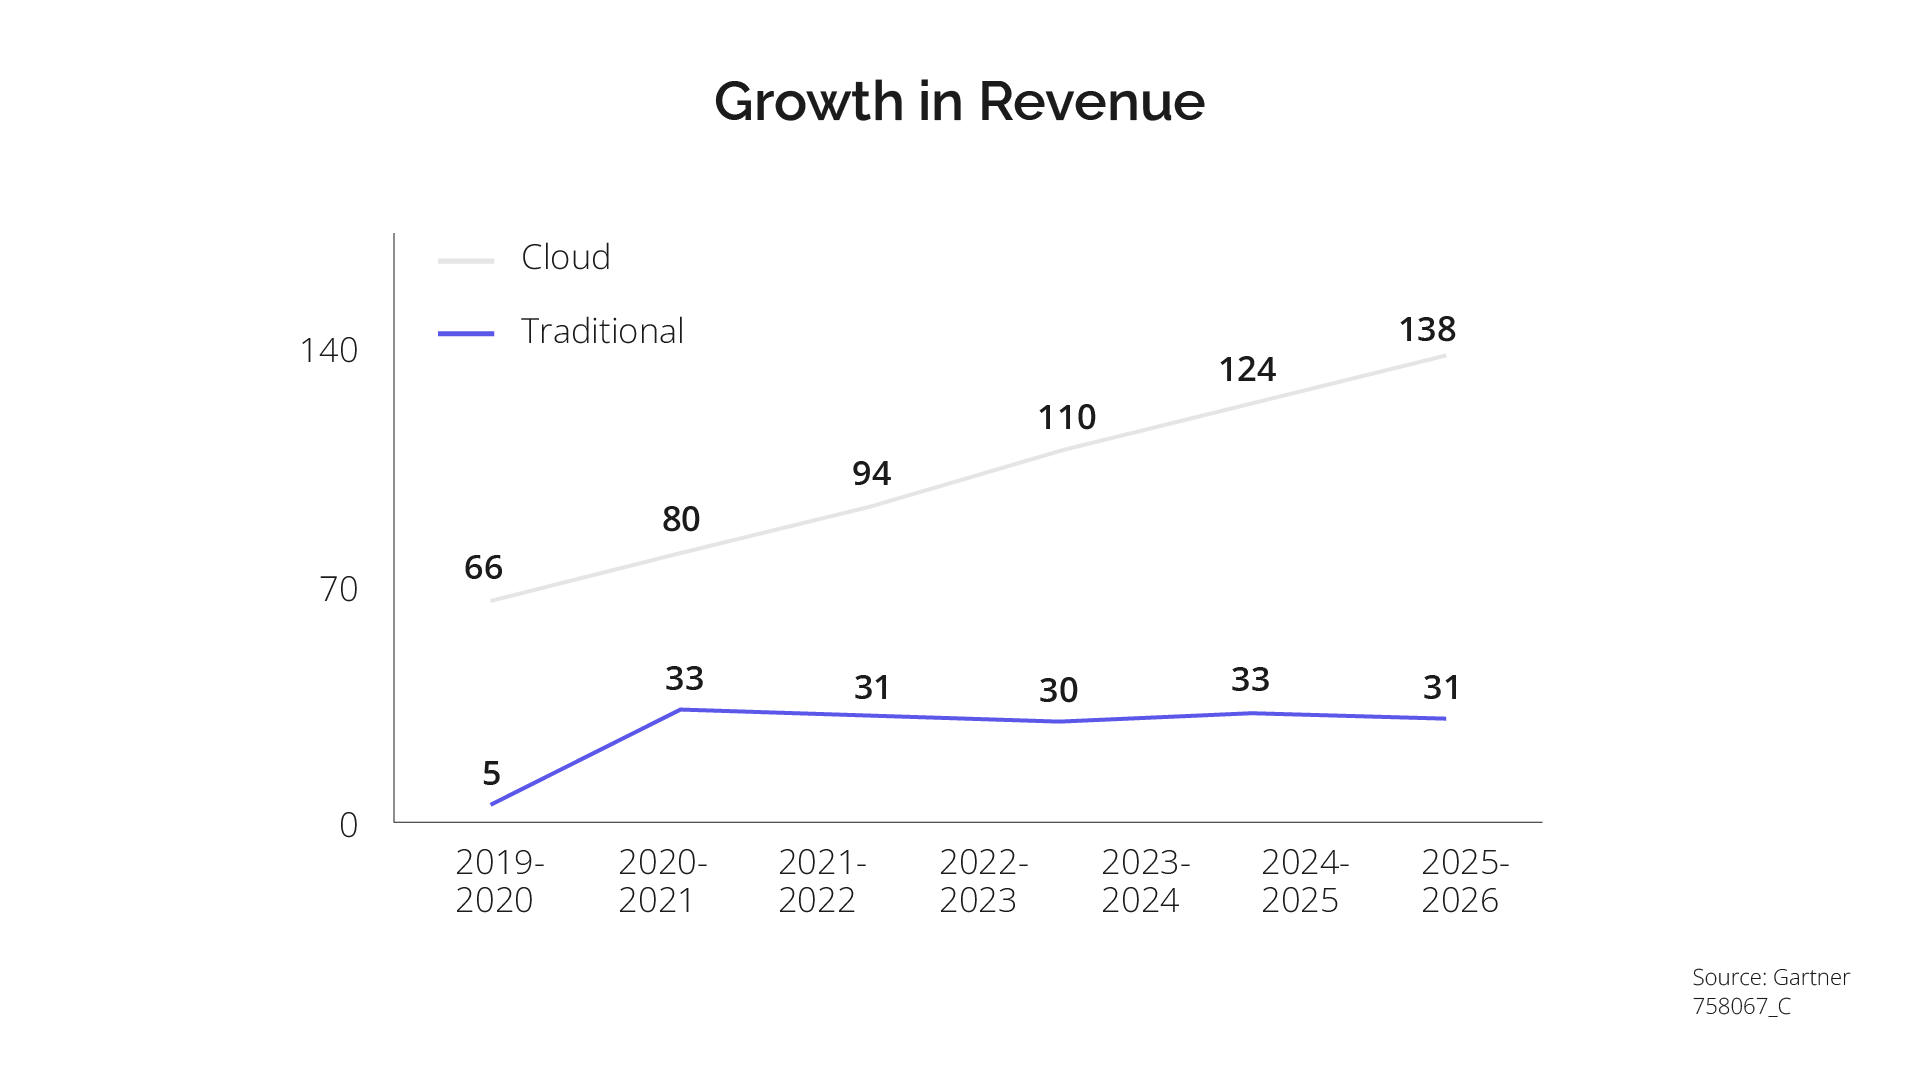 Cloud_Growth in Revenue.png